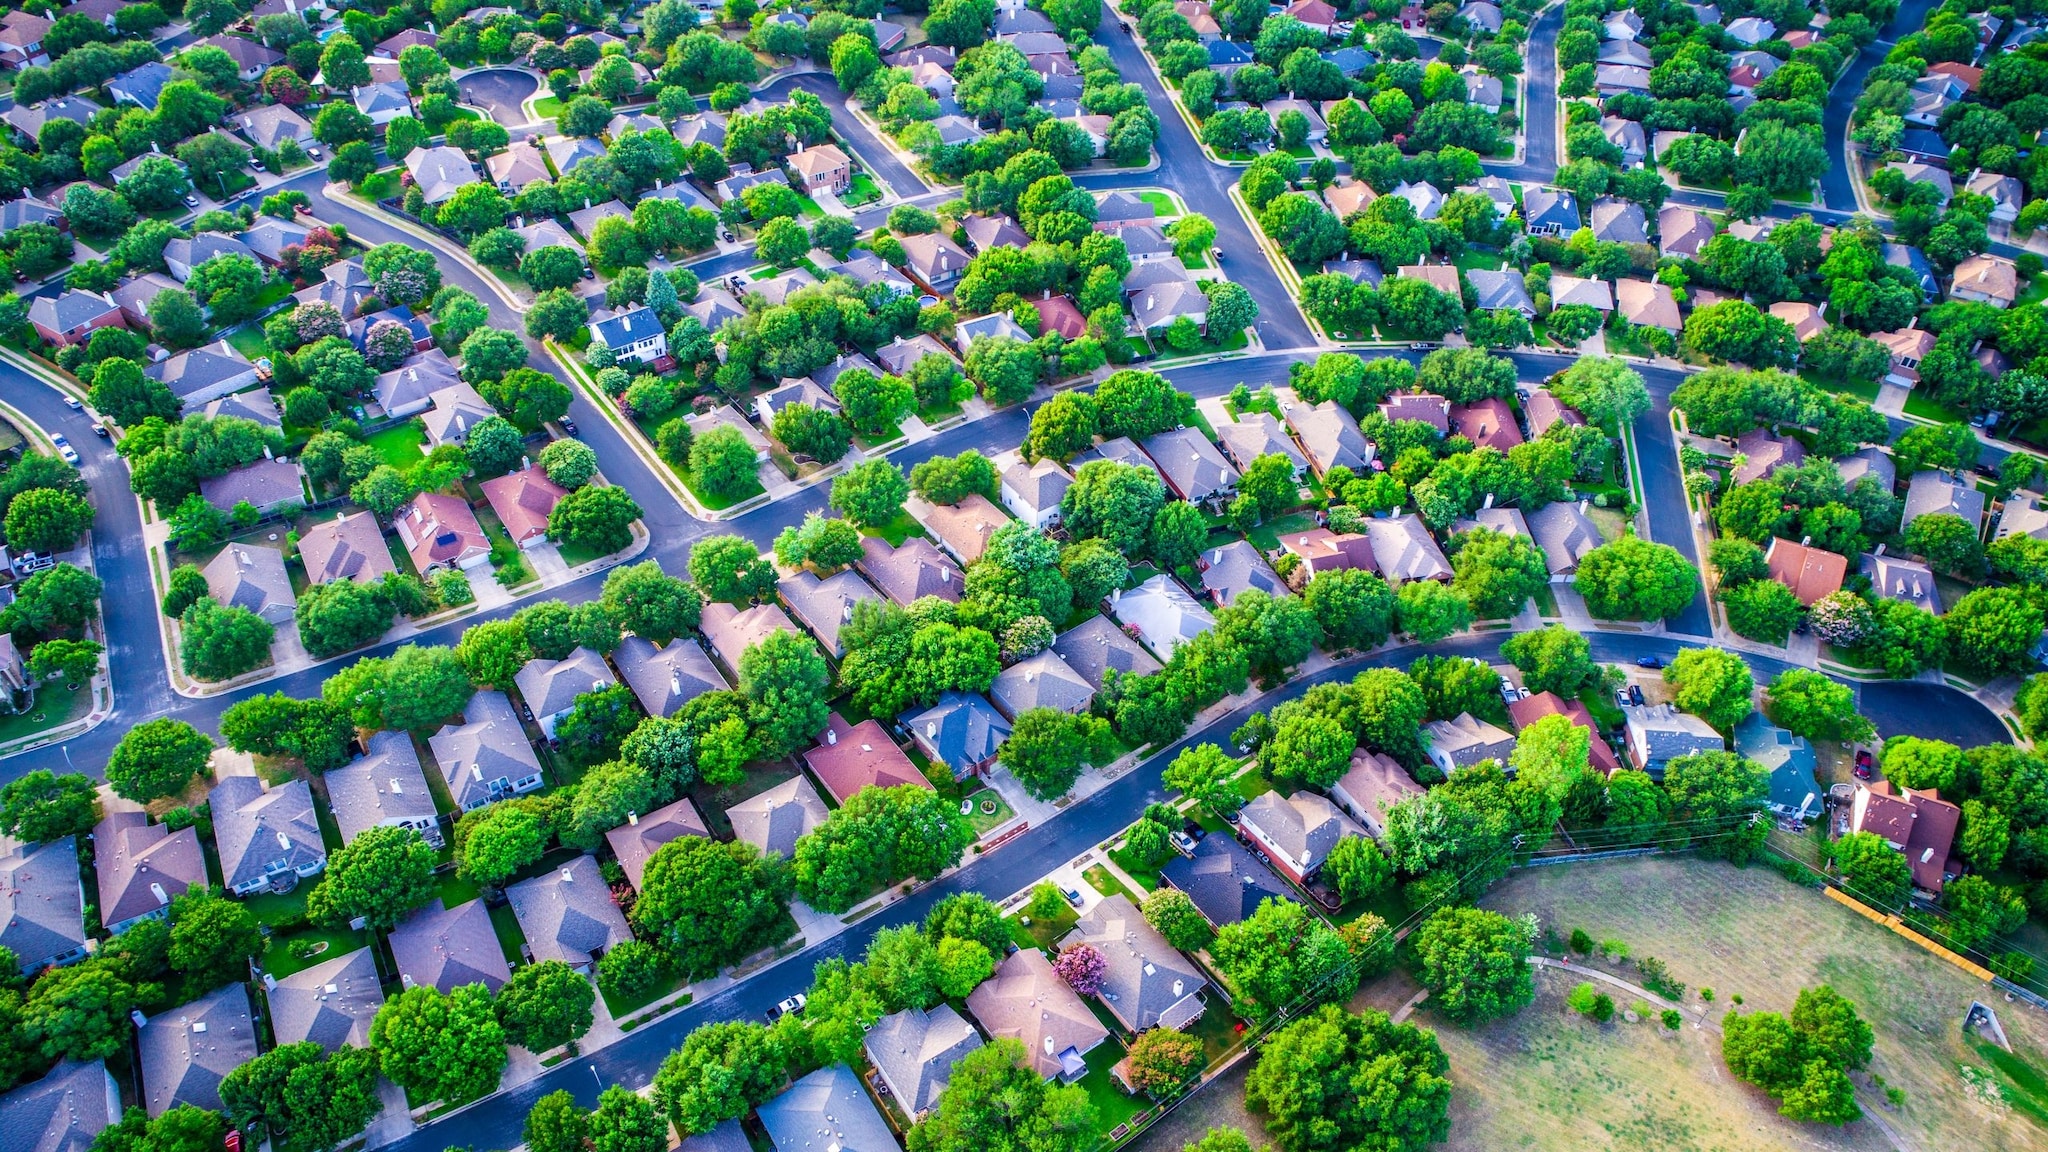 Aerial view of neighborhood with many houses and trees.